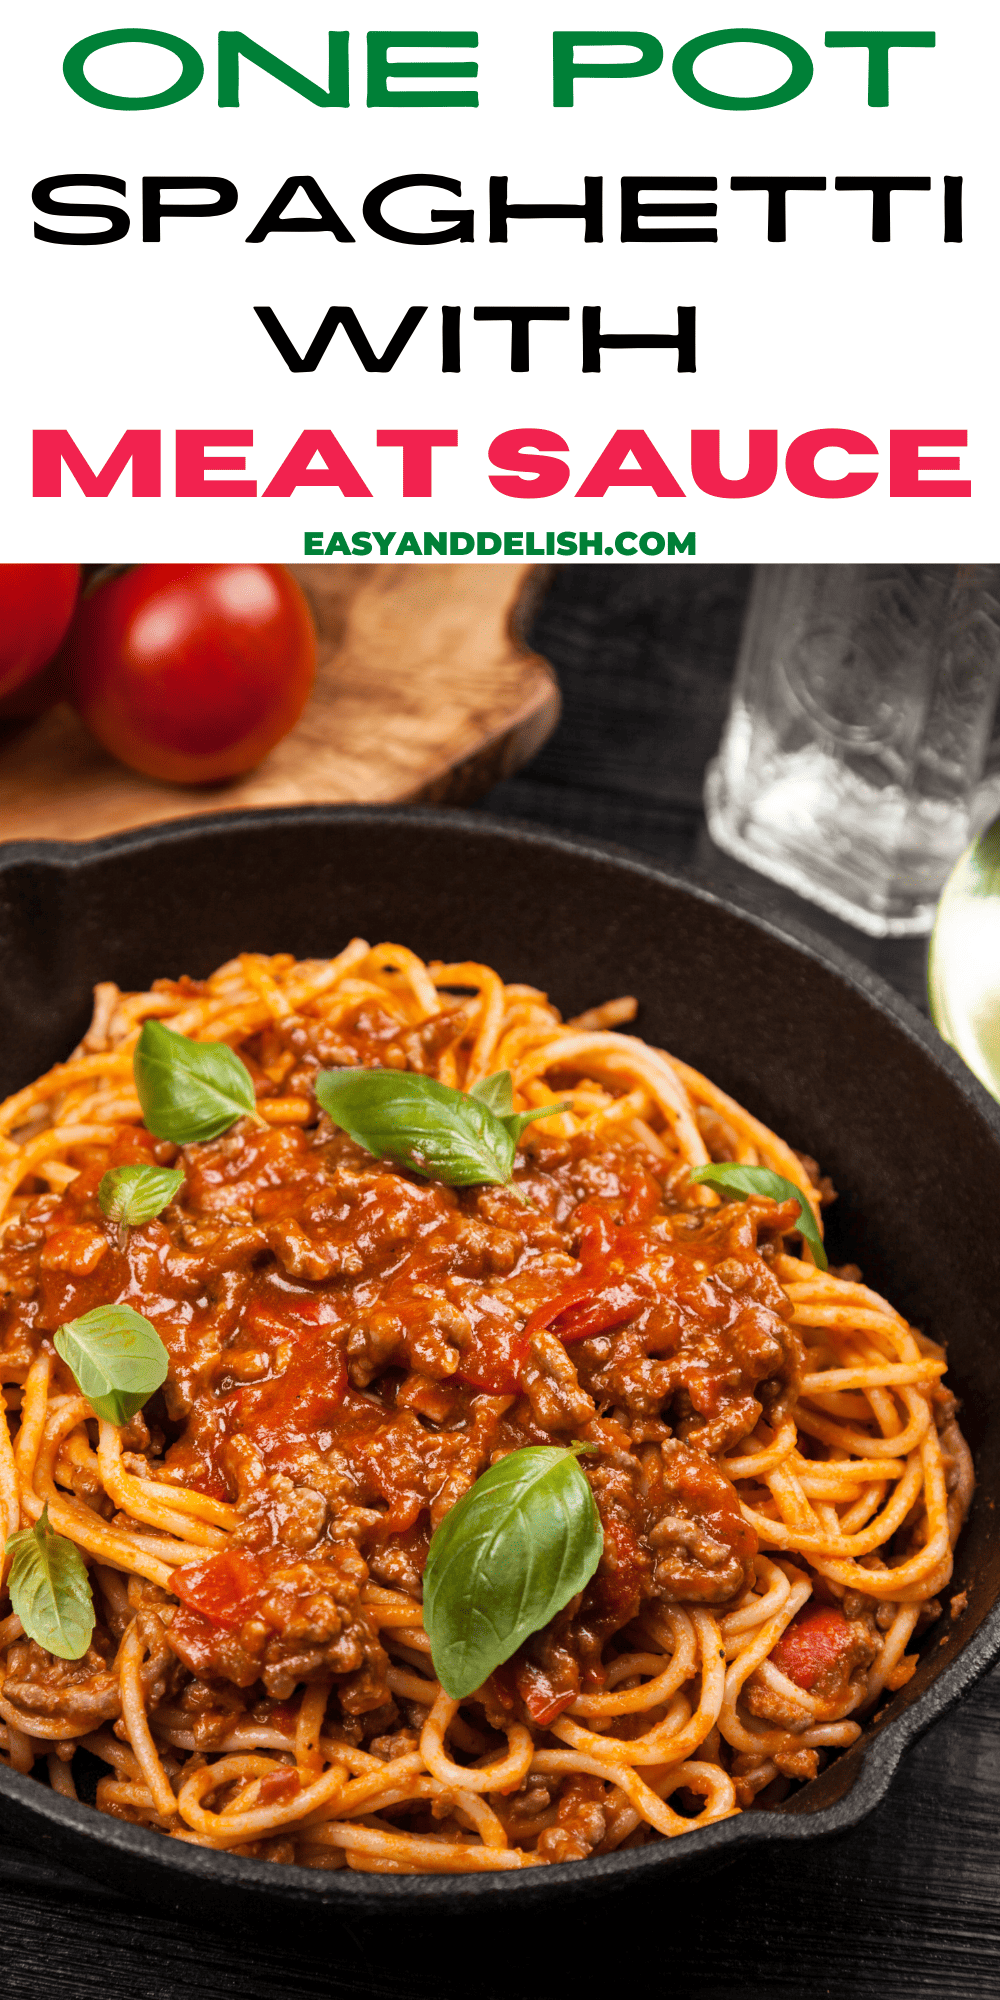 one pot spaghetti with meat sauce with some tomatoes in the background.